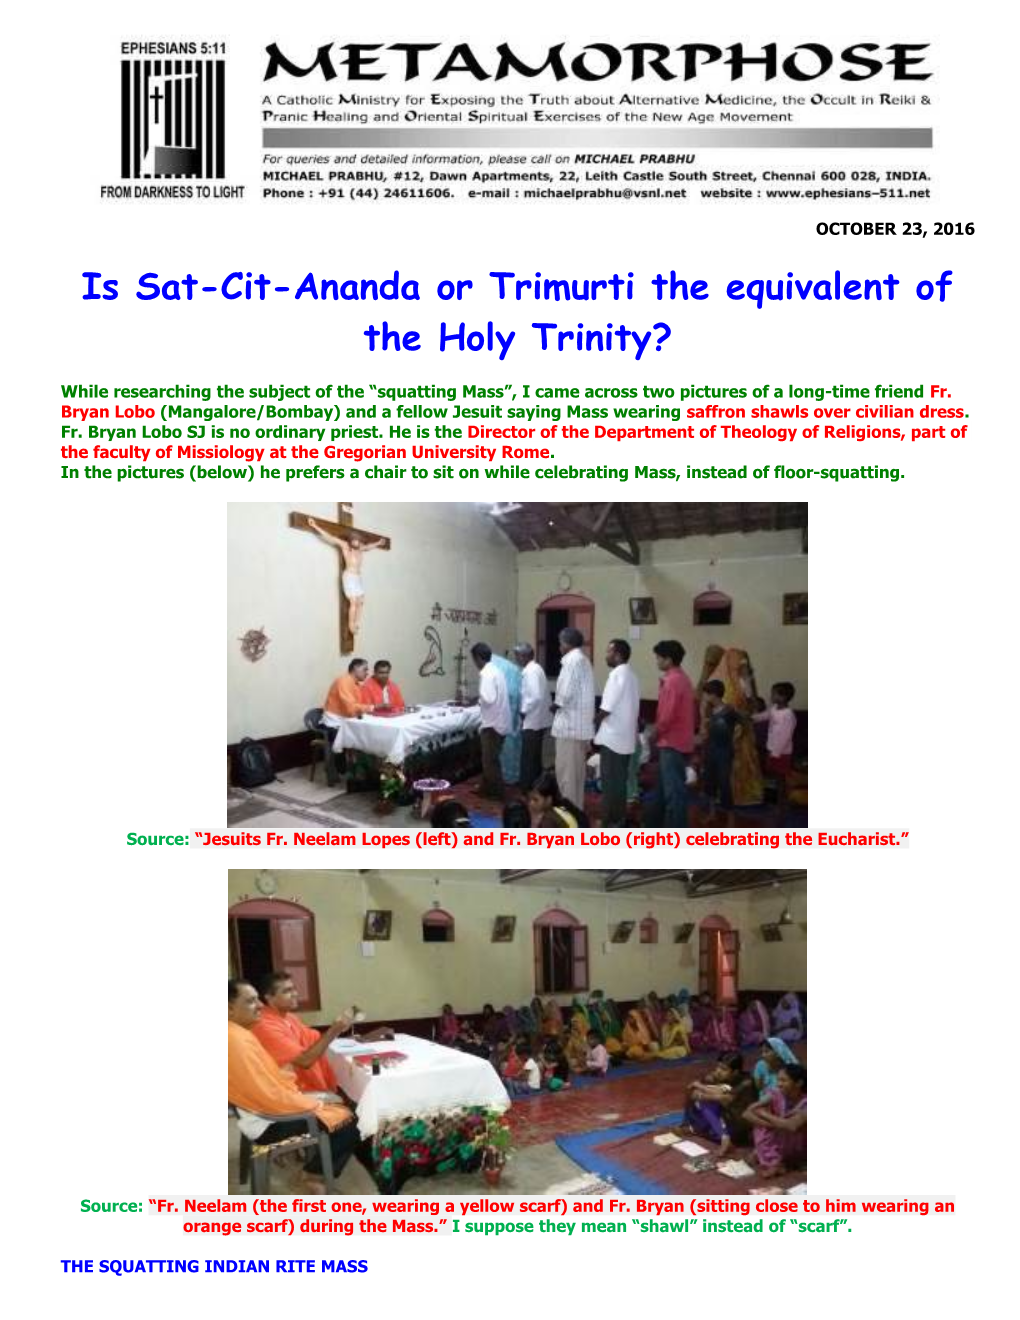 Is Sat-Cit-Ananda Or Trimurti the Equivalent of the Holy Trinity?